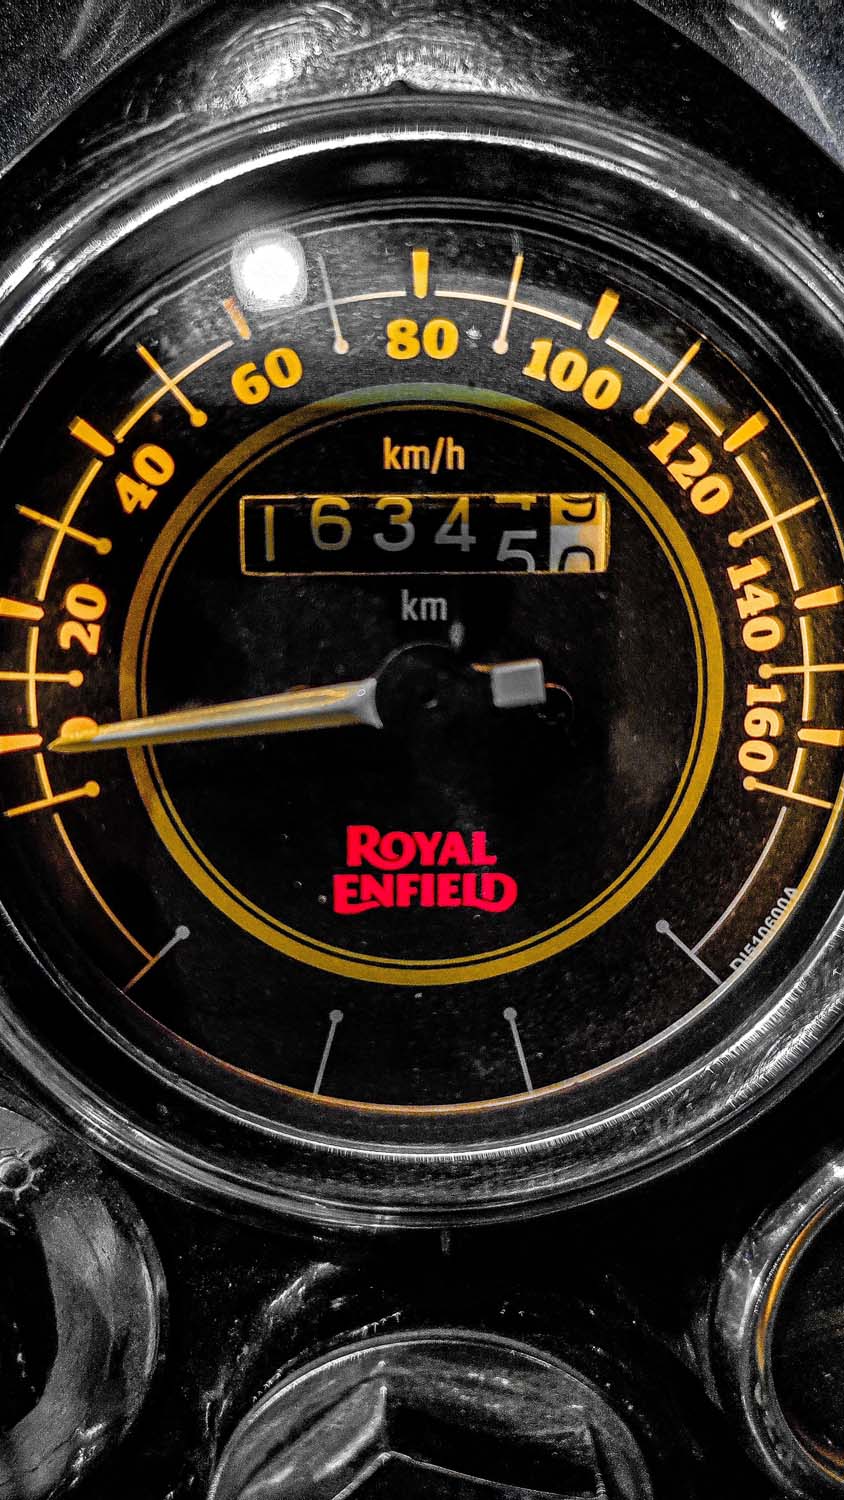 Royal Enfield Meter Console IPhone Wallpaper HD - IPhone Wallpapers :  iPhone Wallpapers